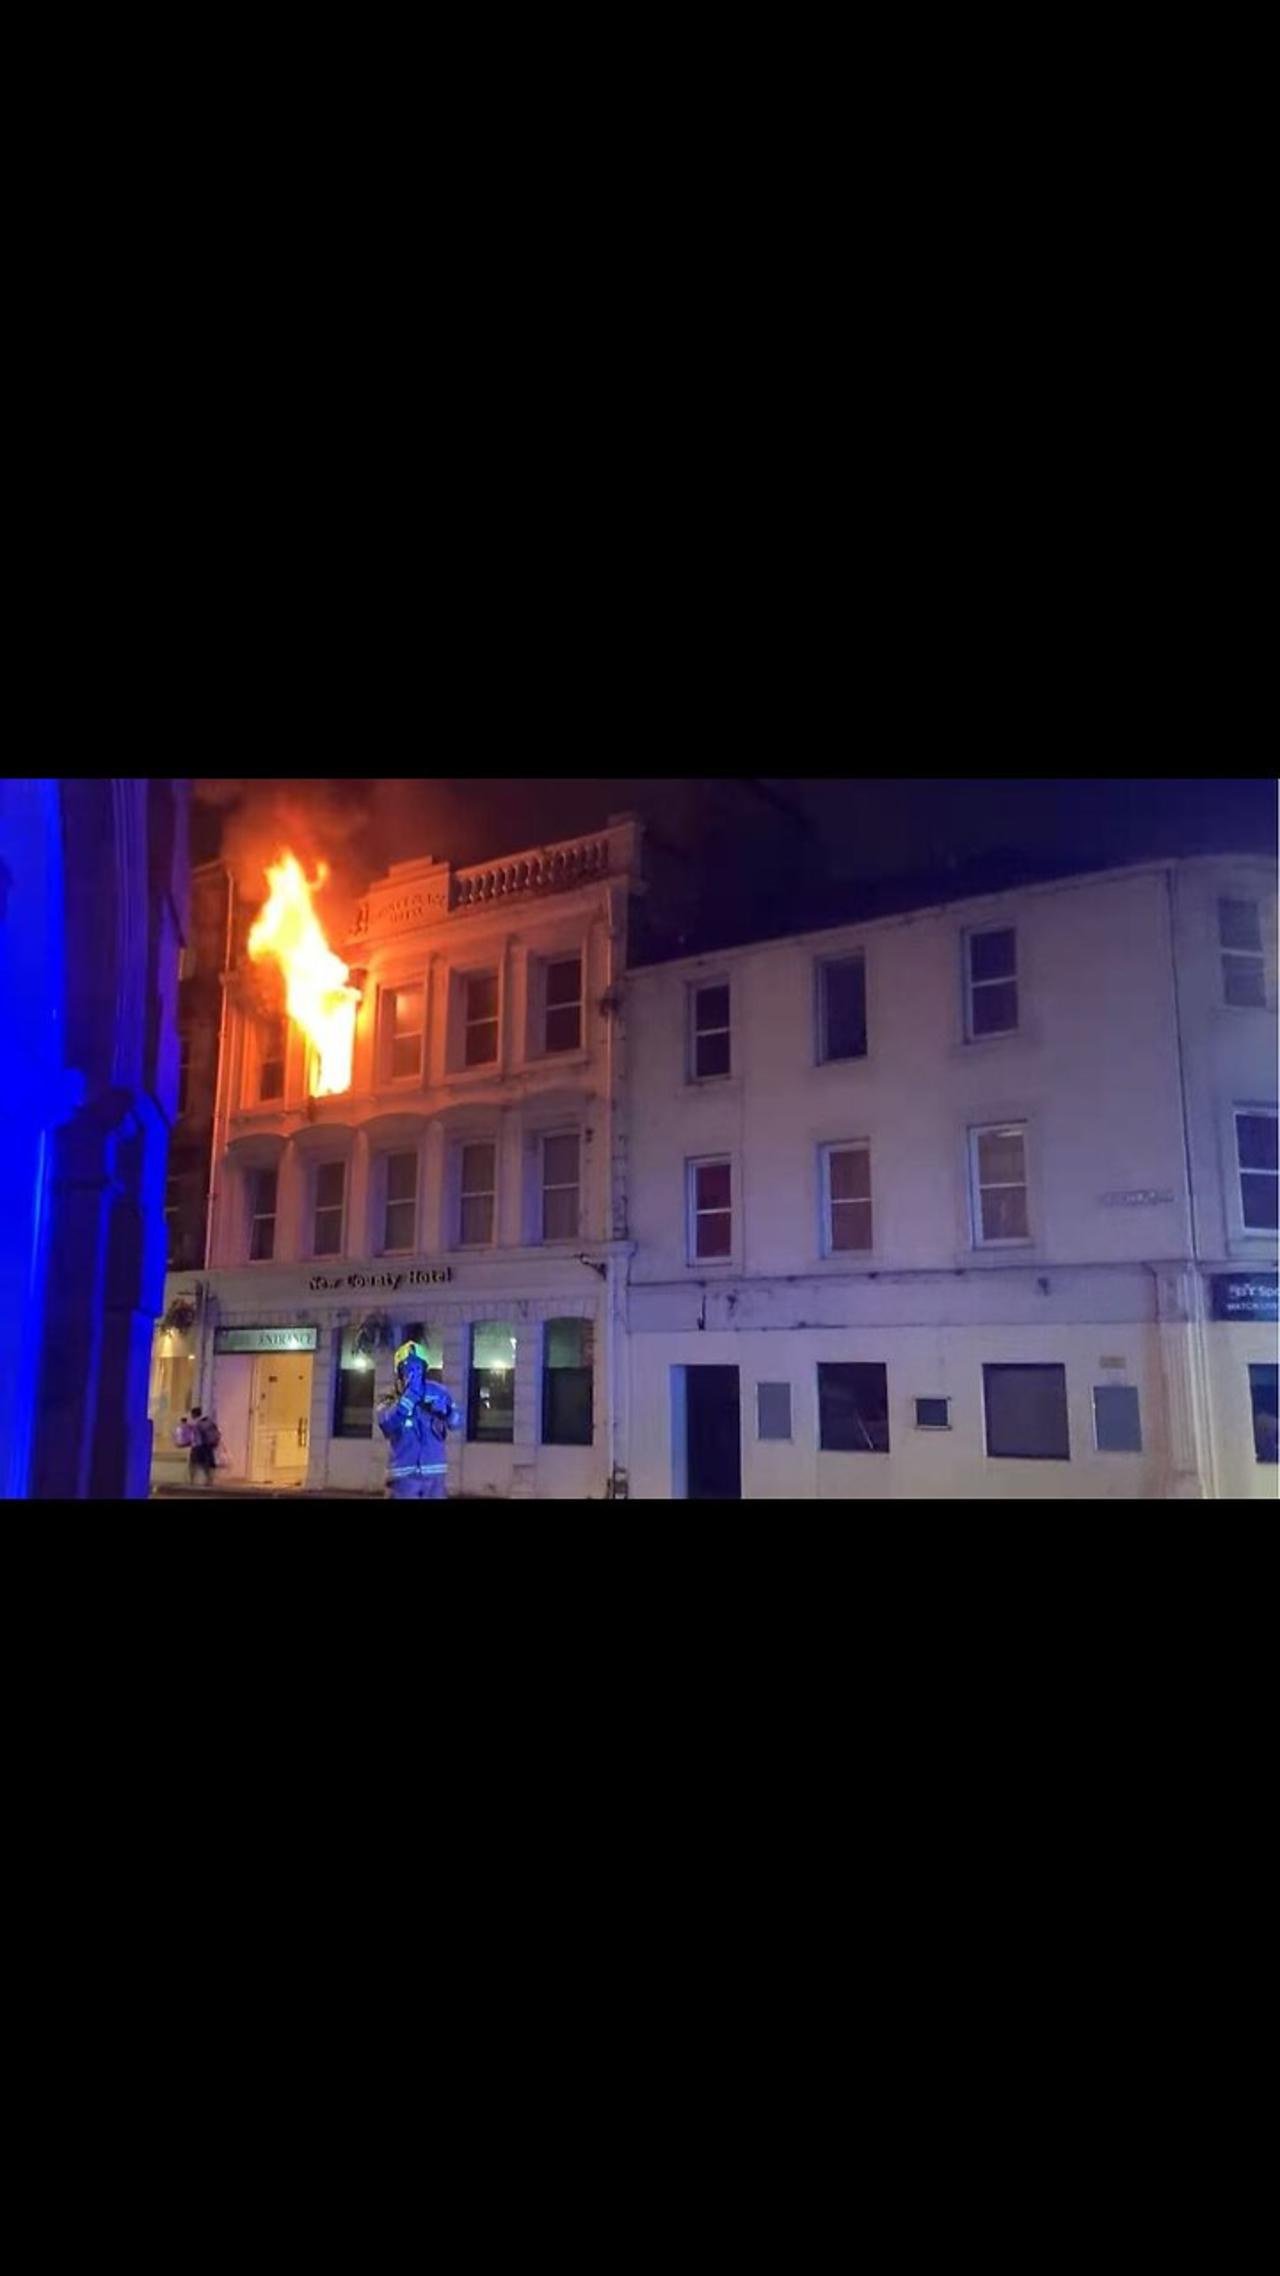 3 "guests" (yes really) killed in Scotland hotel fire.  BBC bury details